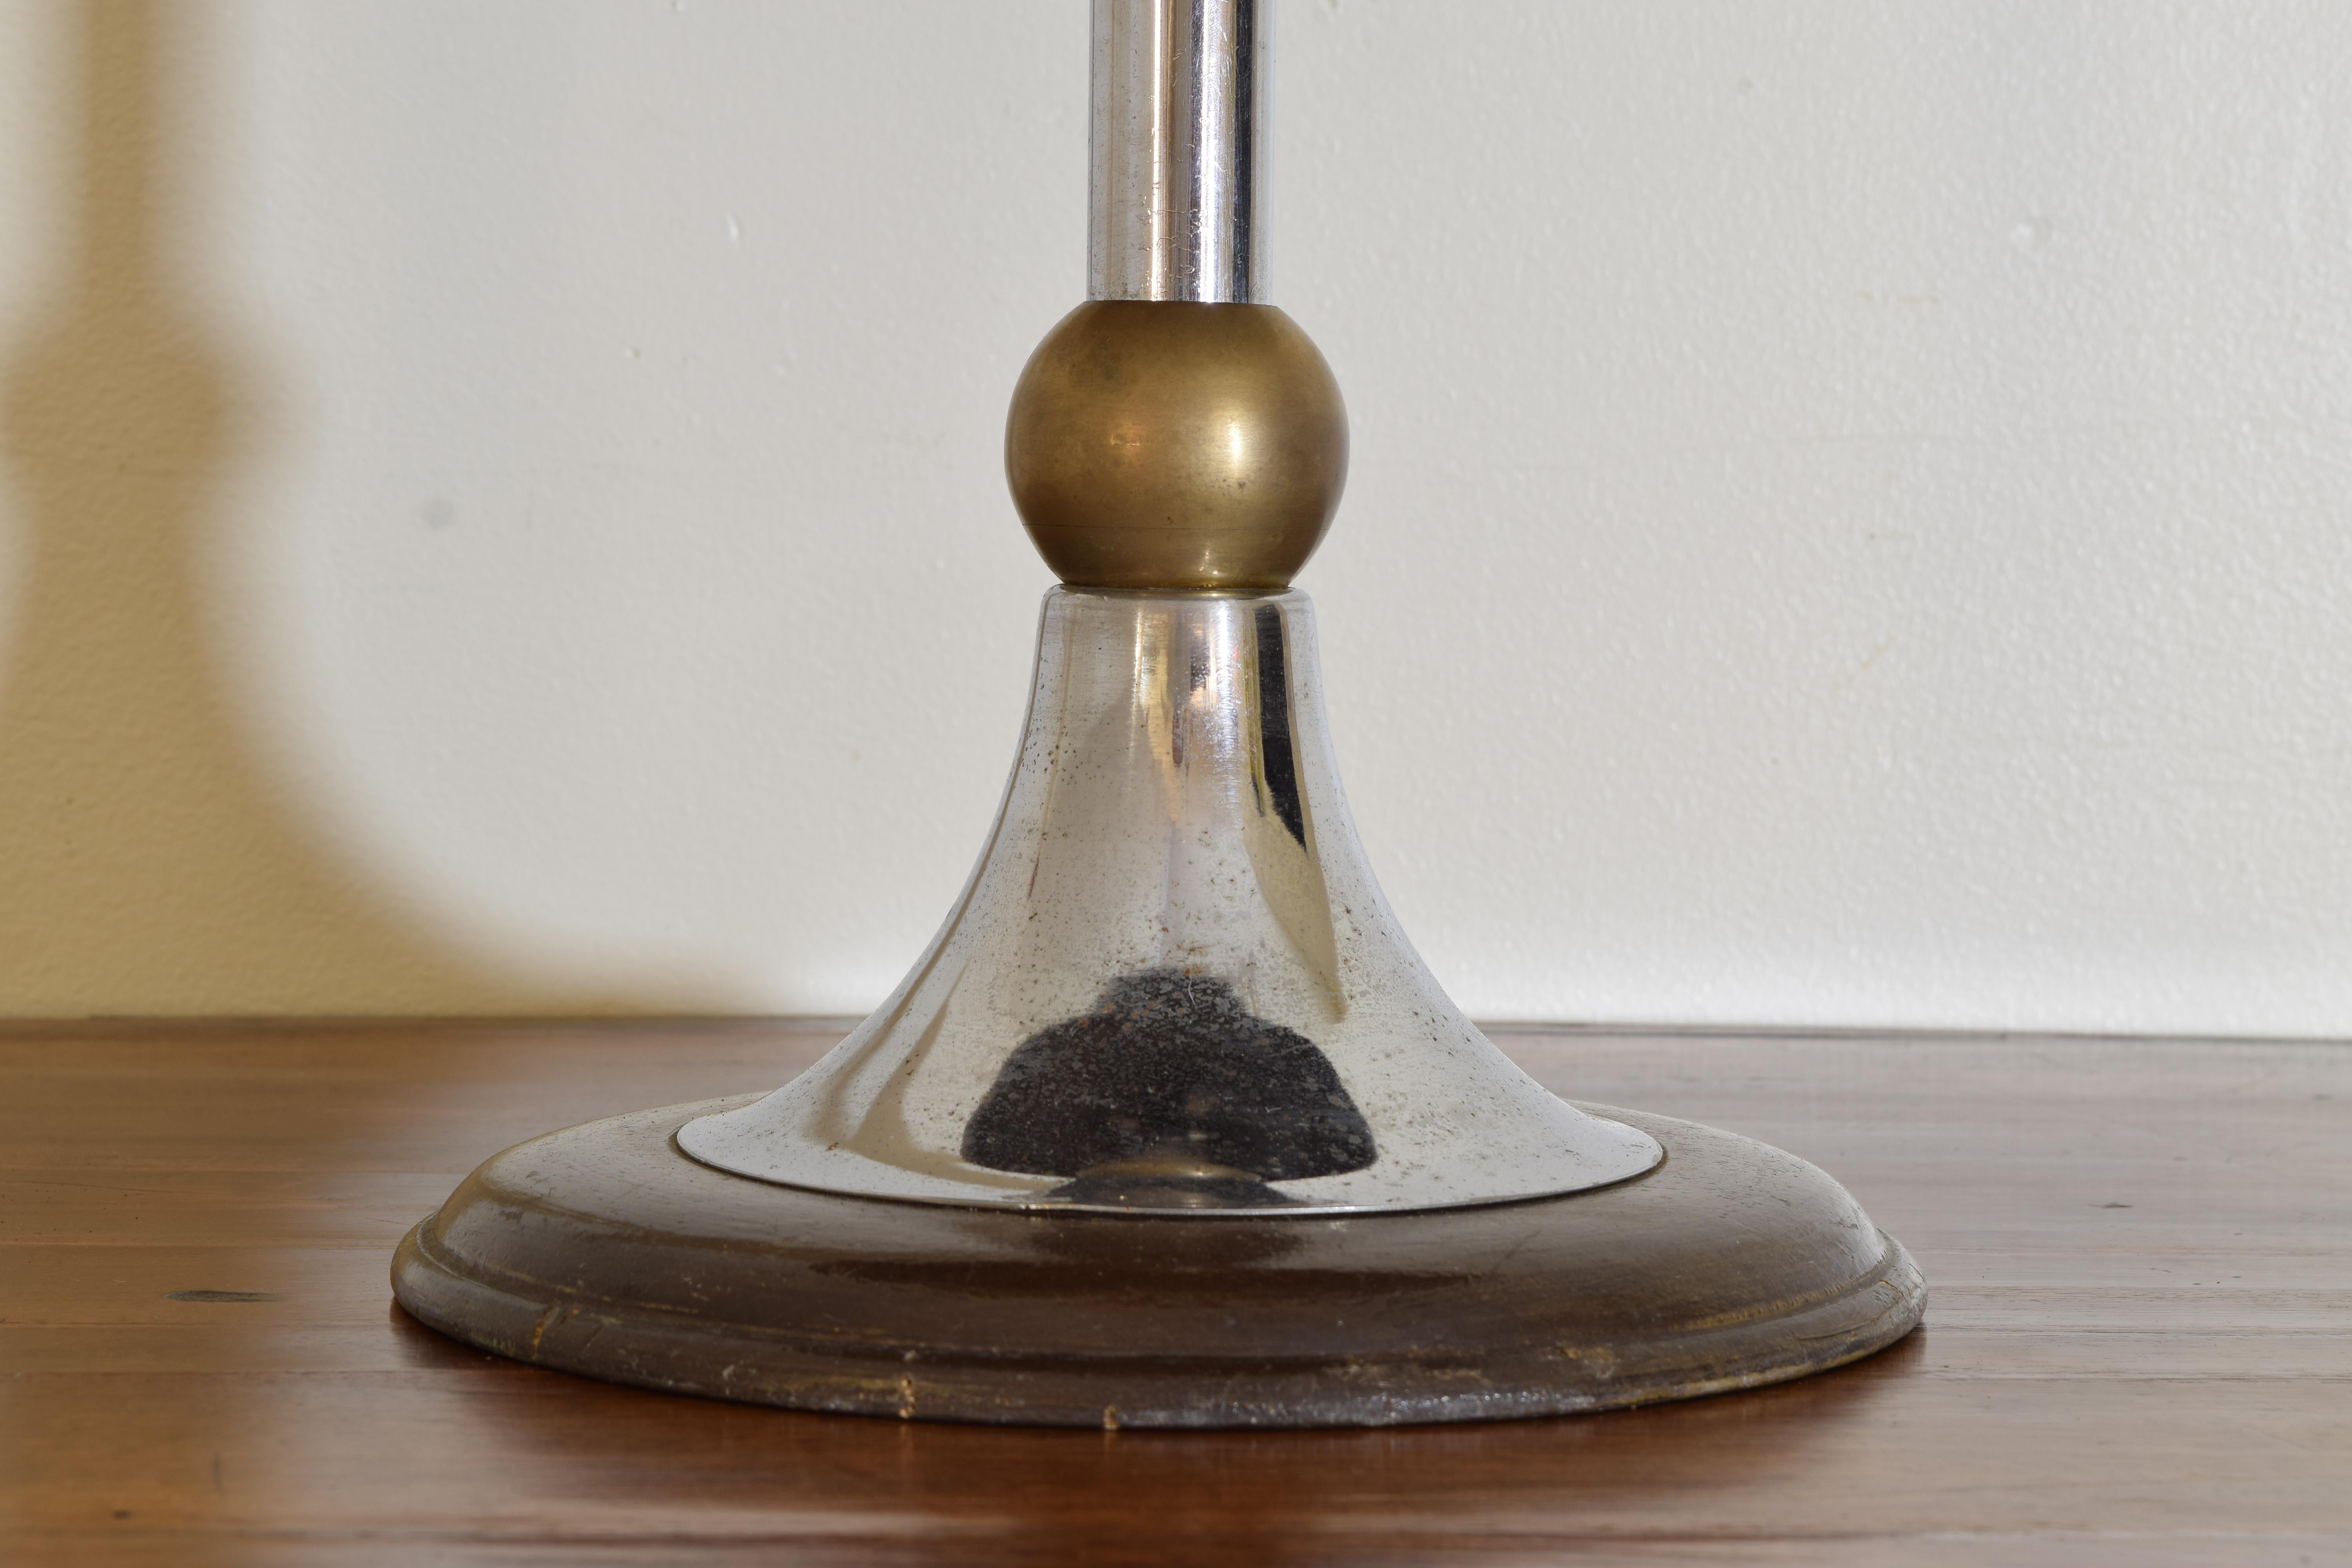 Italian Mid Century Modern Chrome and Brass Table Lamp, early 2nd half 20th cen. For Sale 3